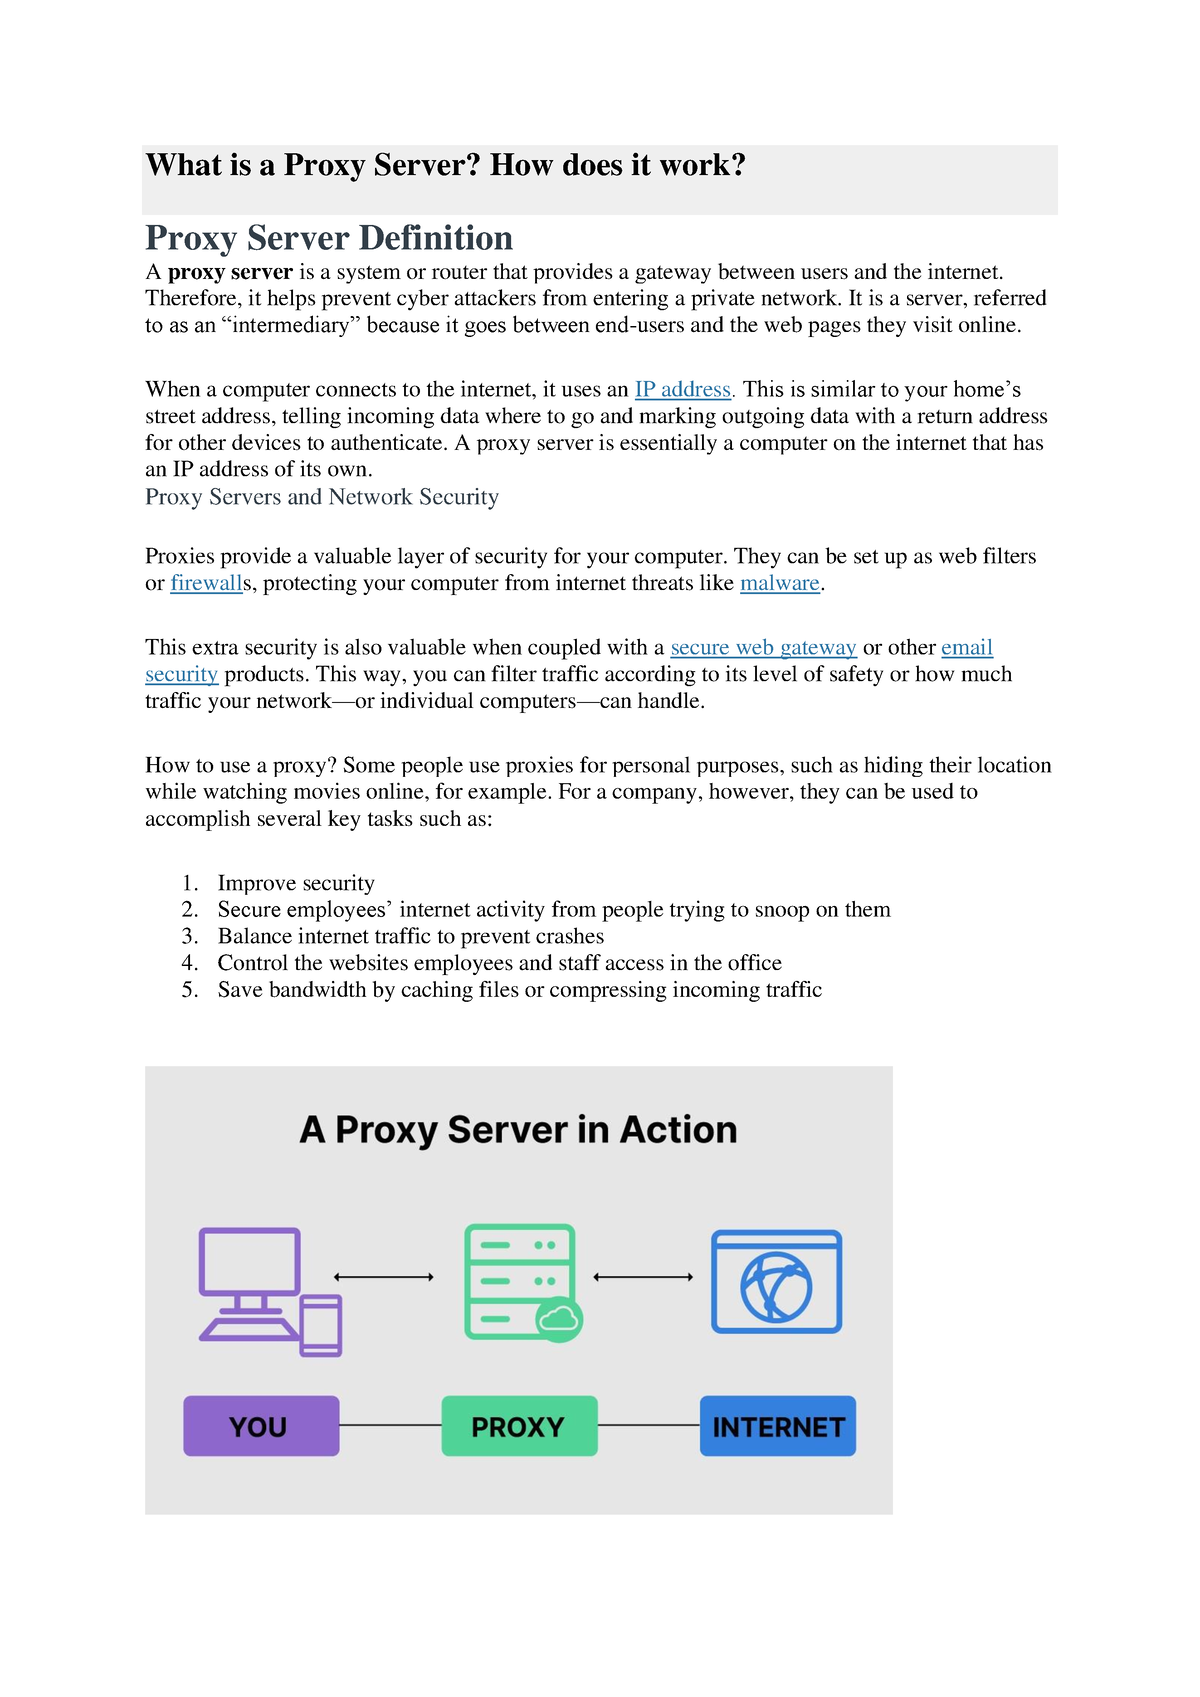 What is a Proxy Server? How They Work + Security Risks